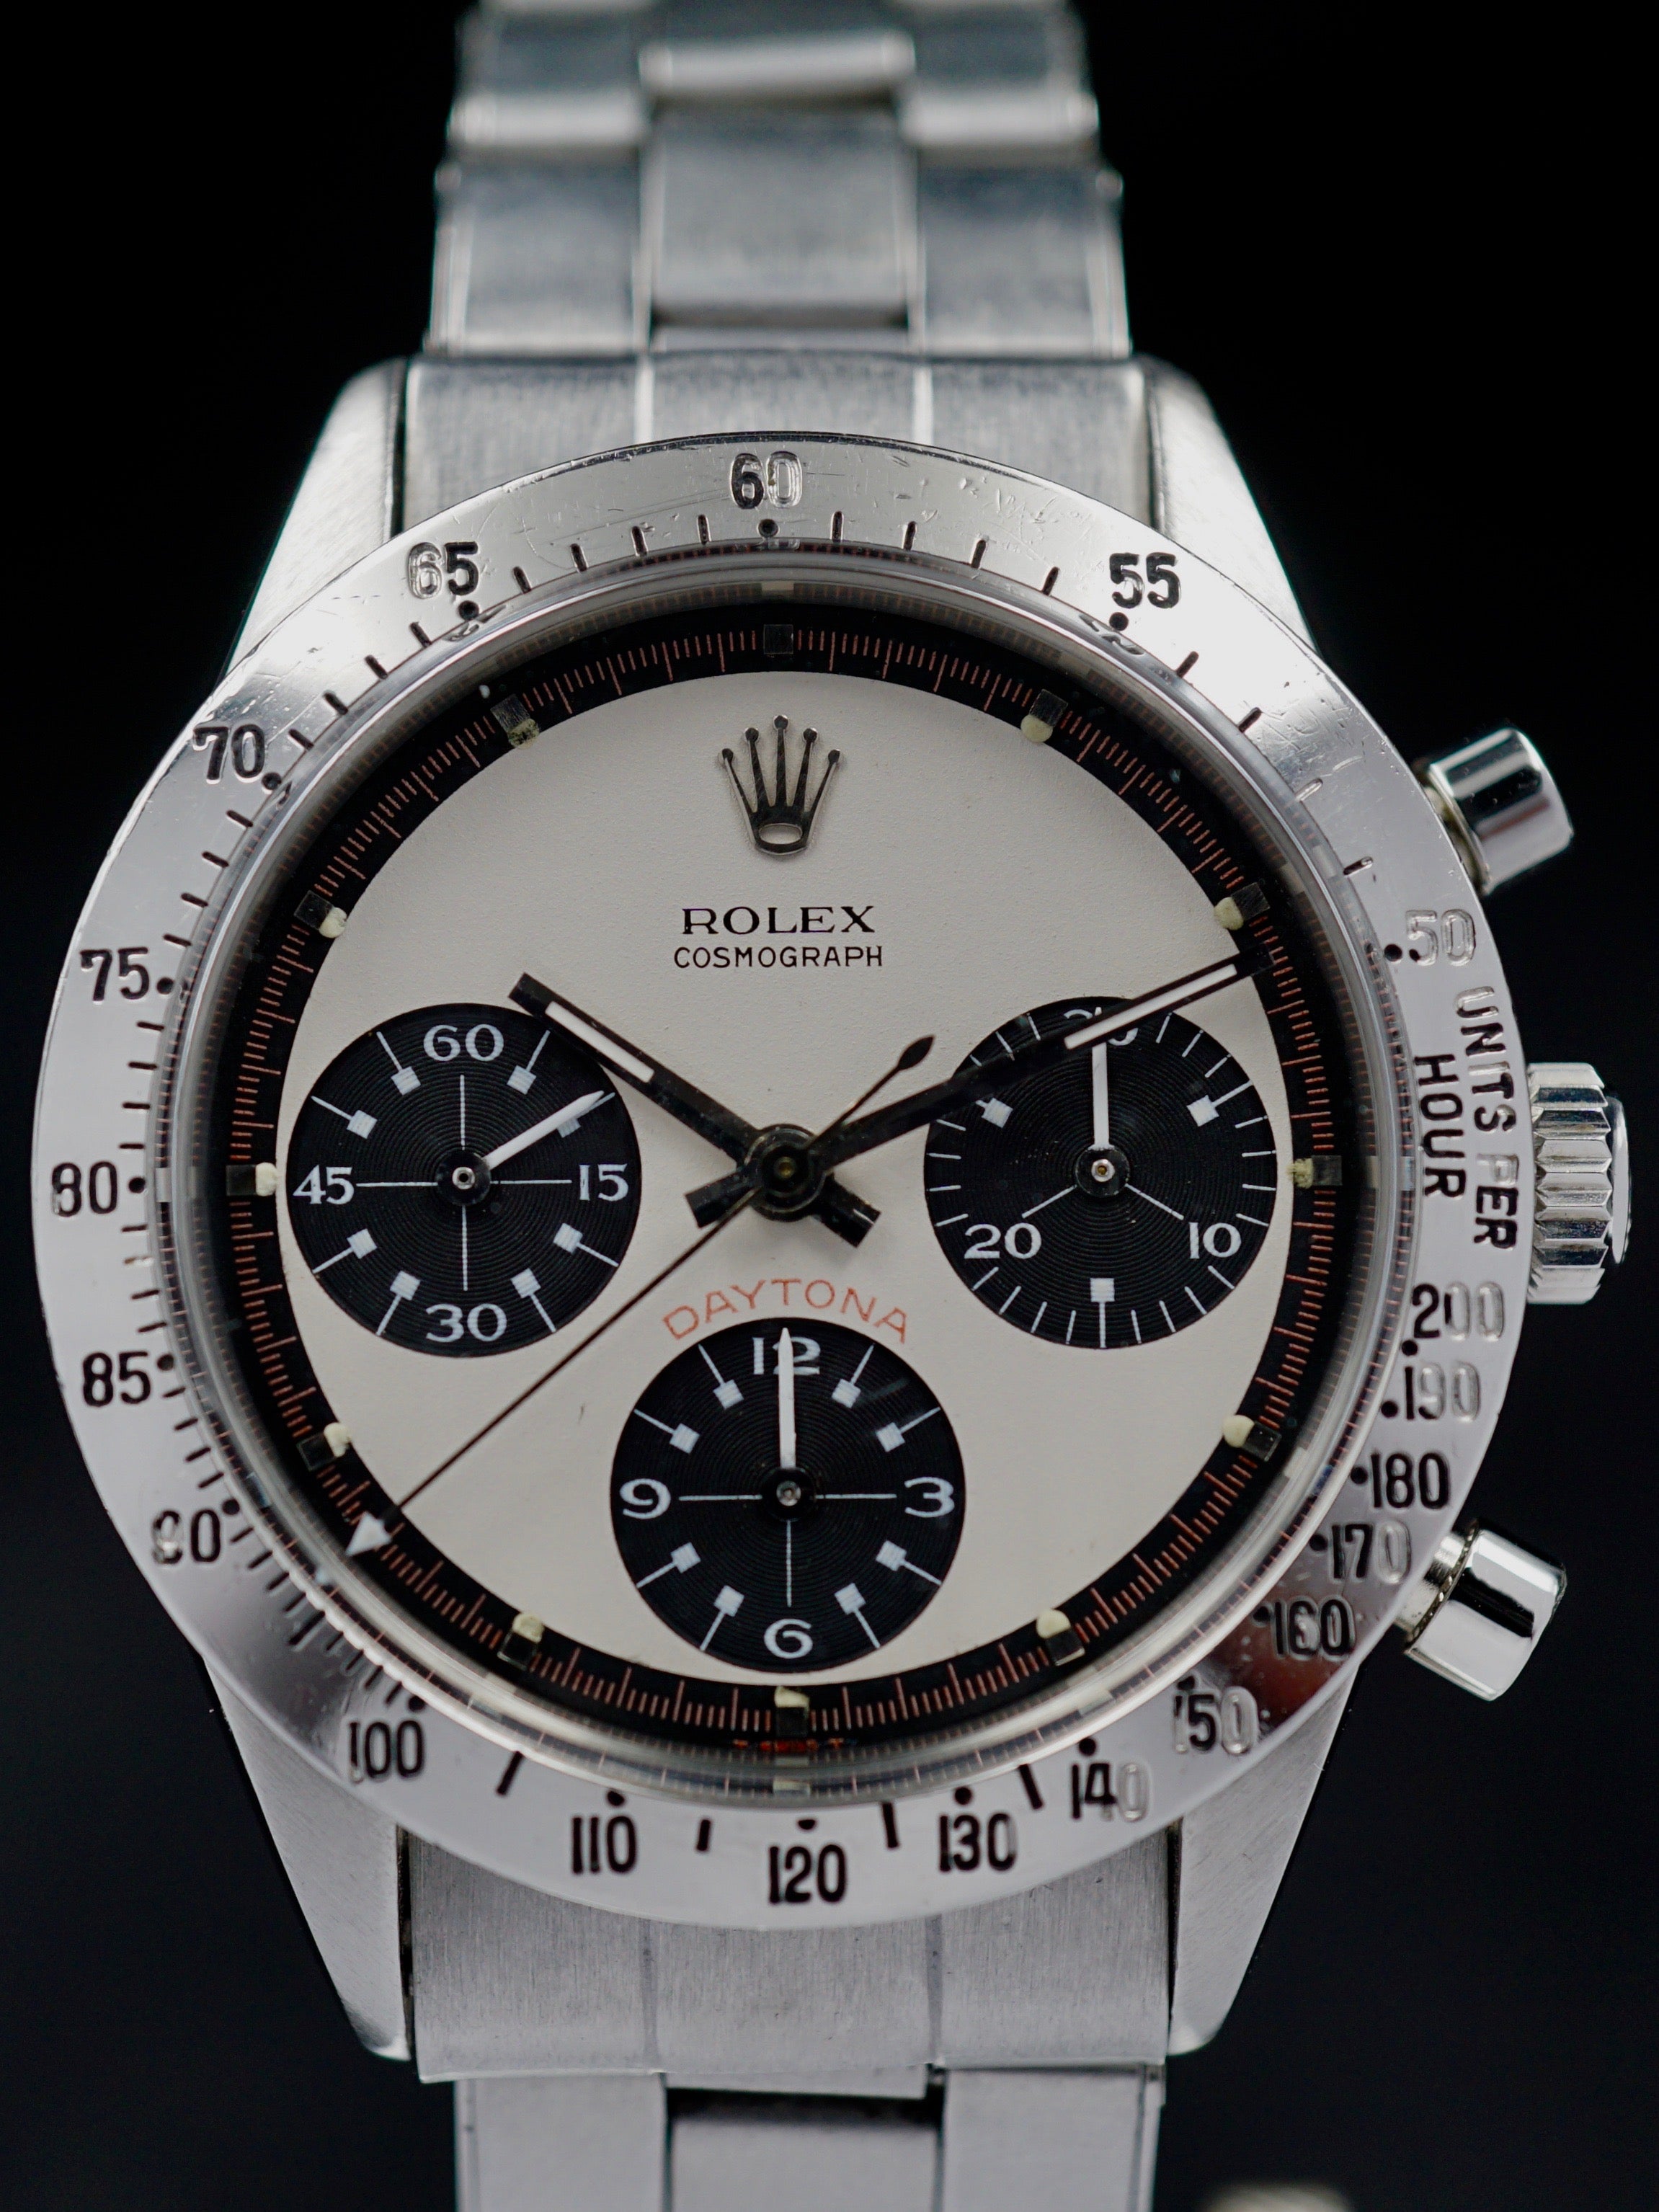 1969 Rolex Daytona 6239 "Paul Newman Exotic Dial" W/ Box and Papers